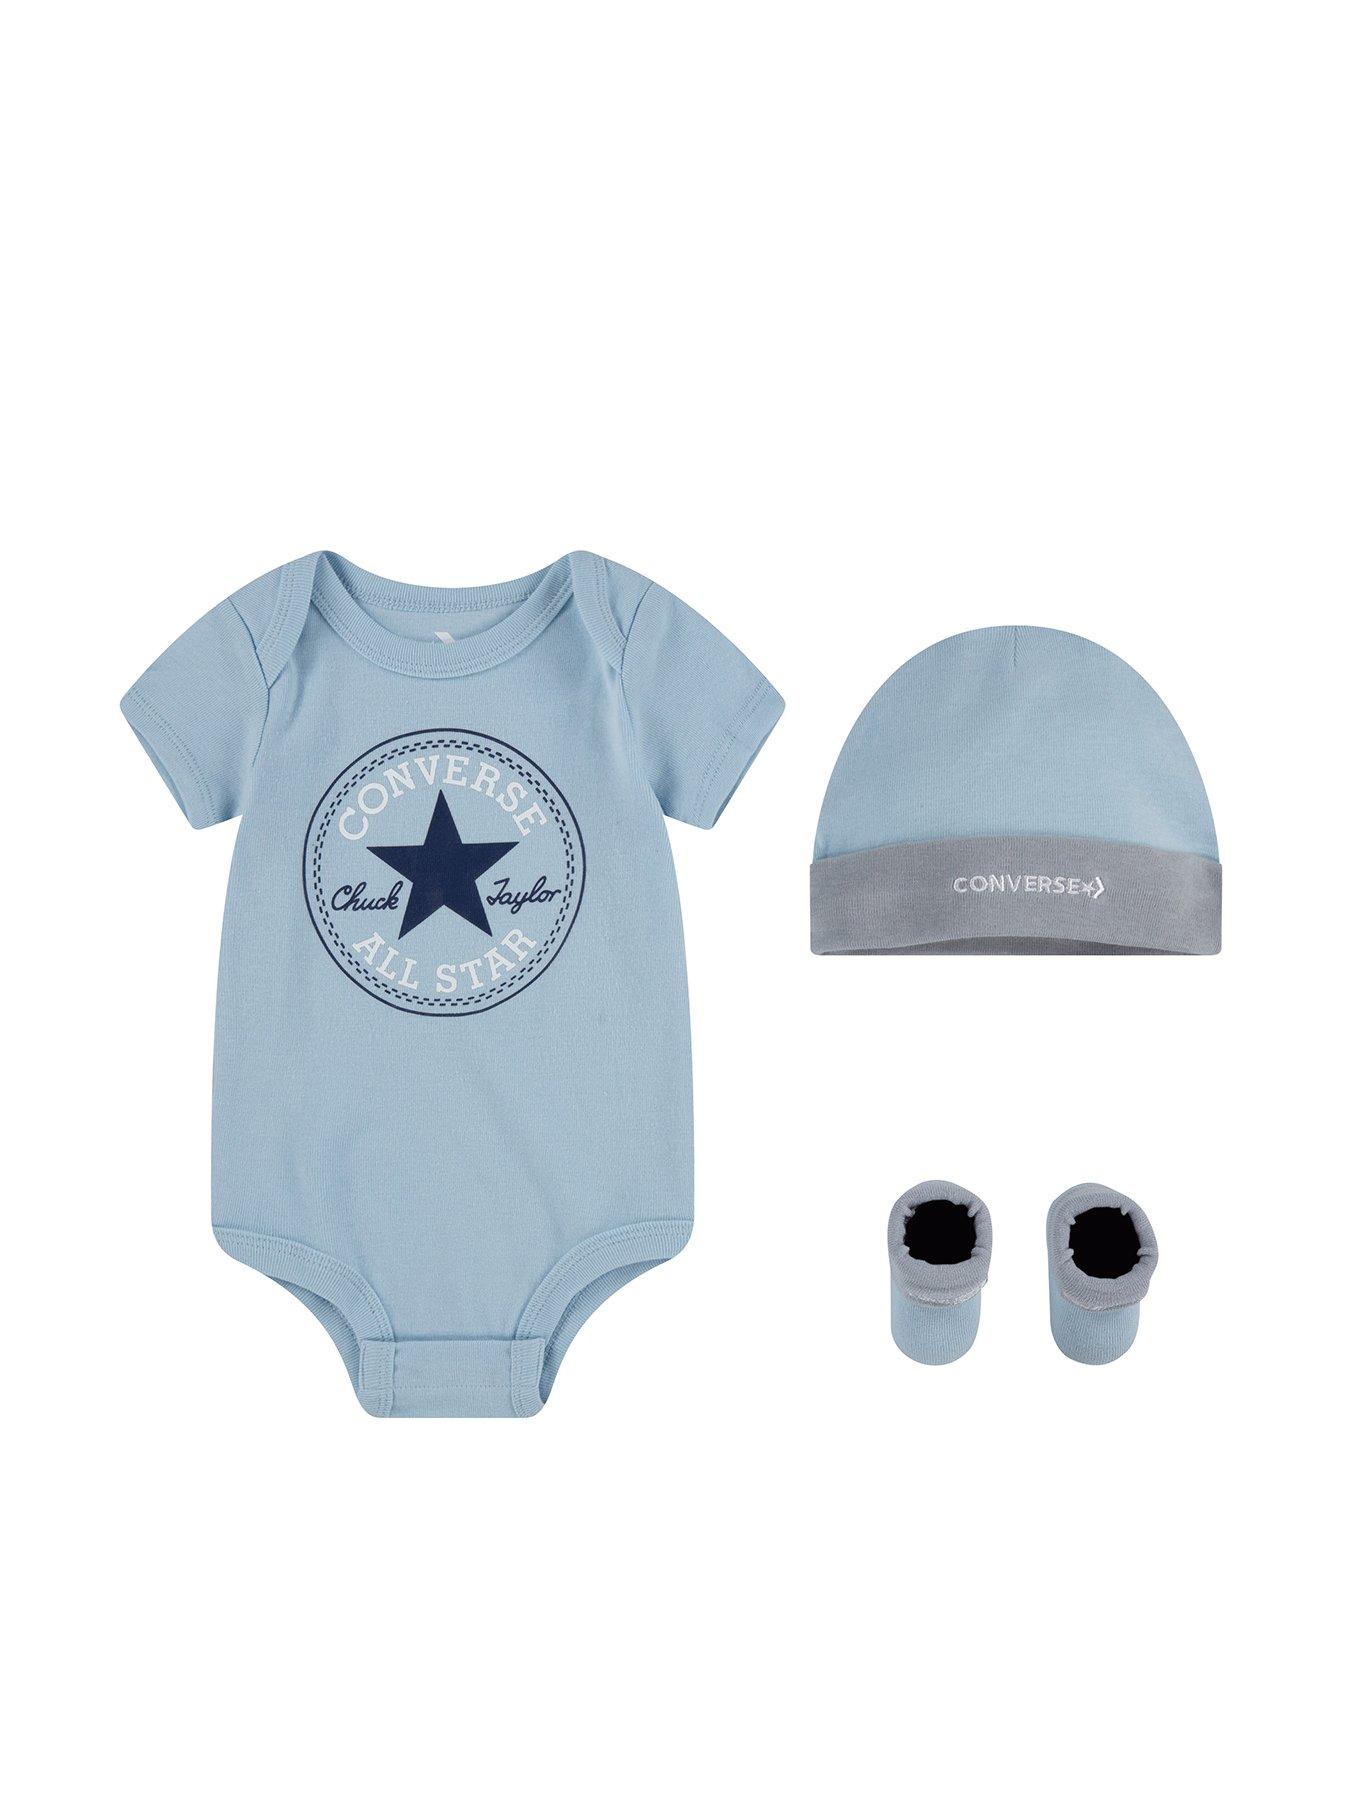 Gifts | Baby clothes | Child & baby Ireland